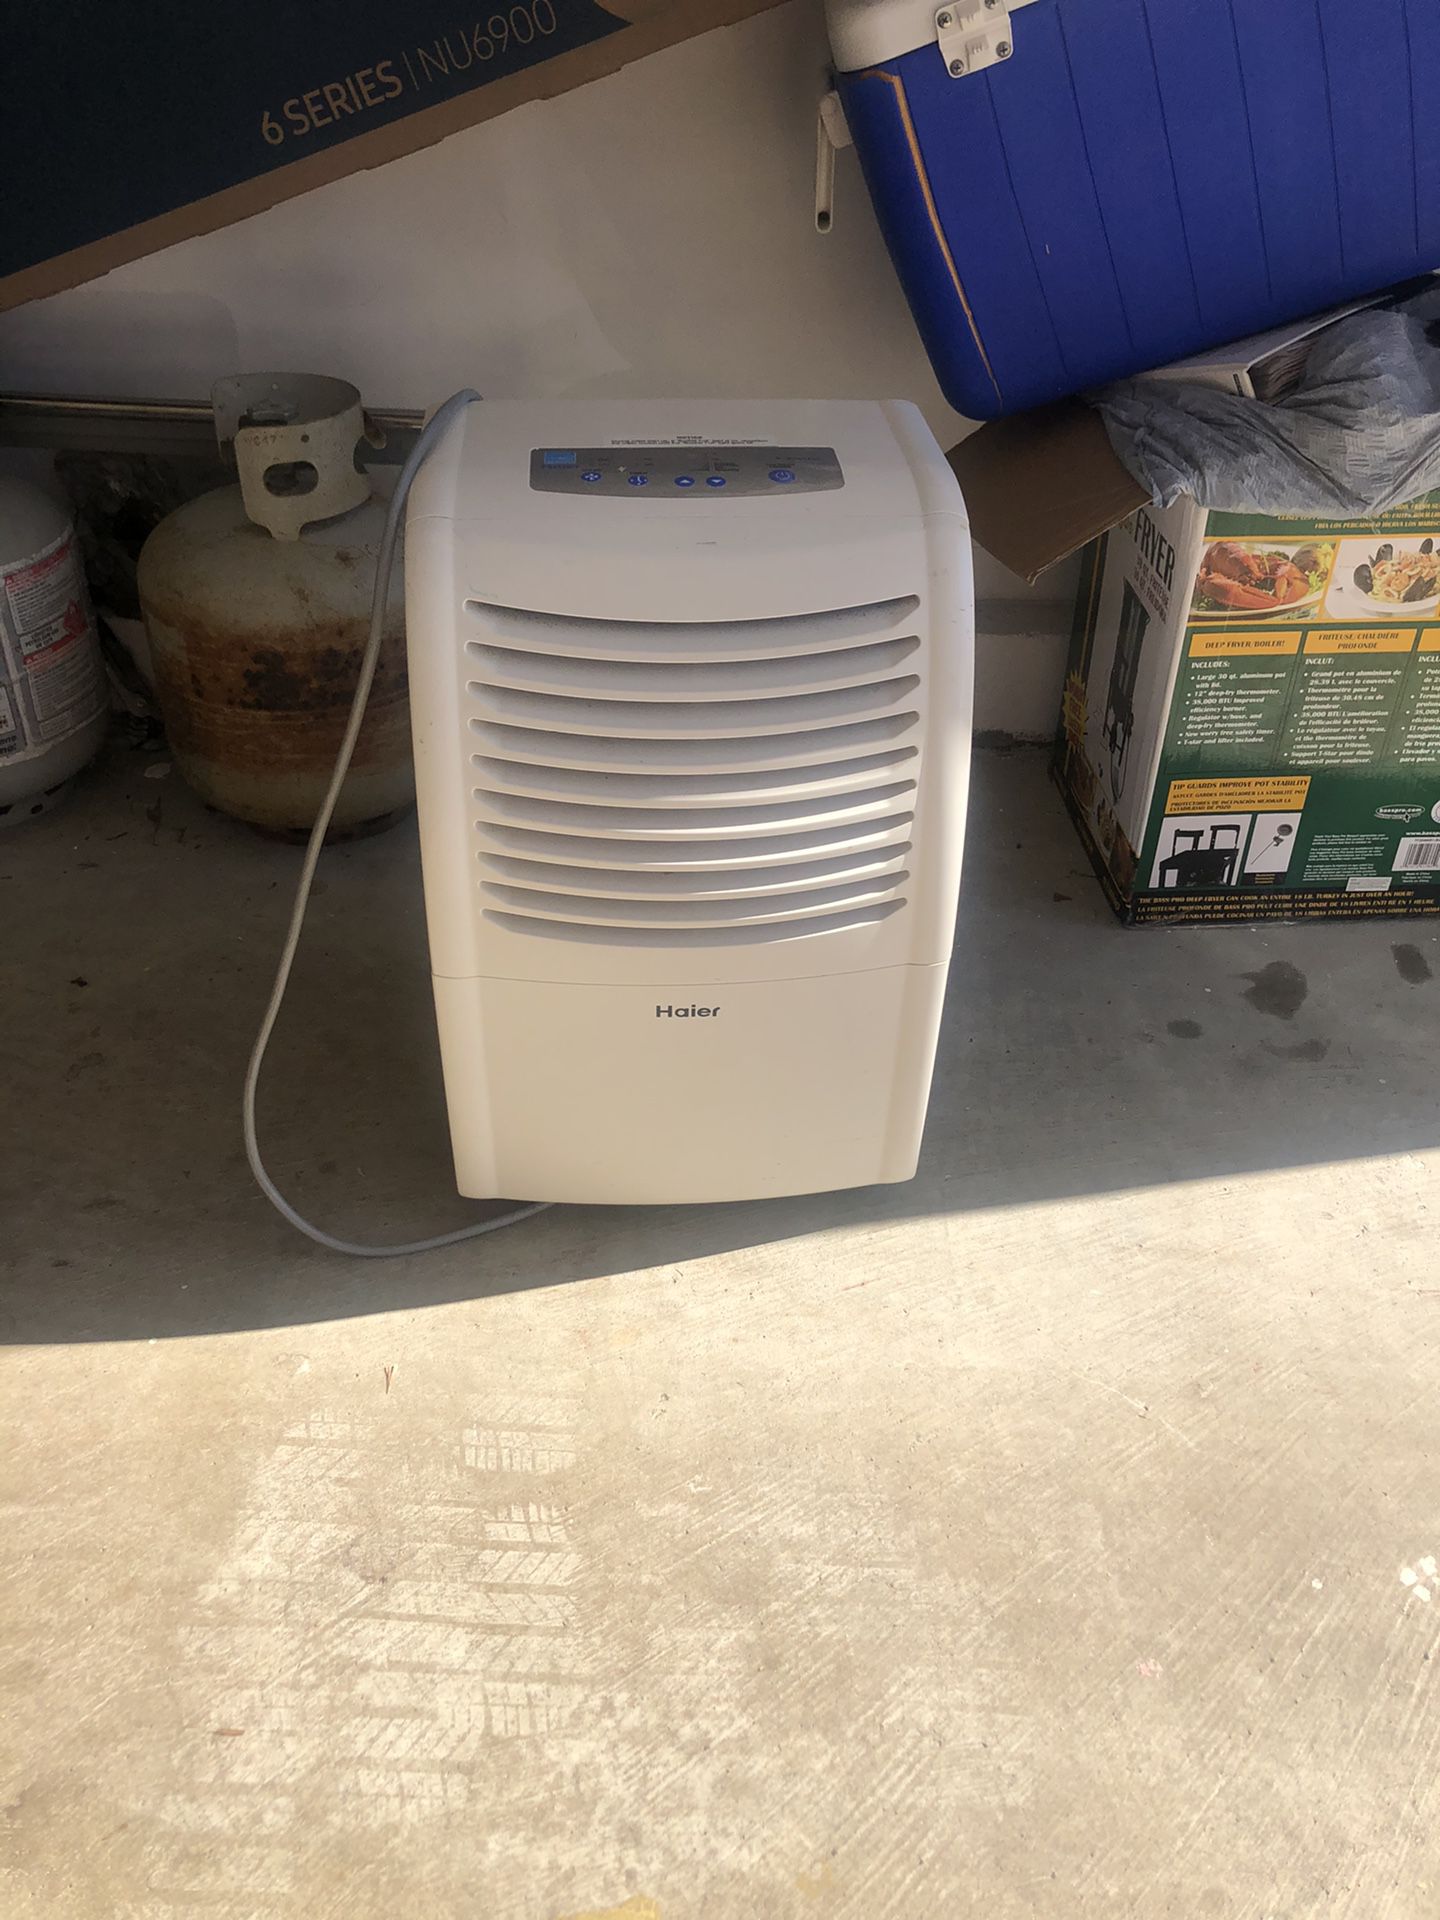 Haier Dehumidifier- in good working condition